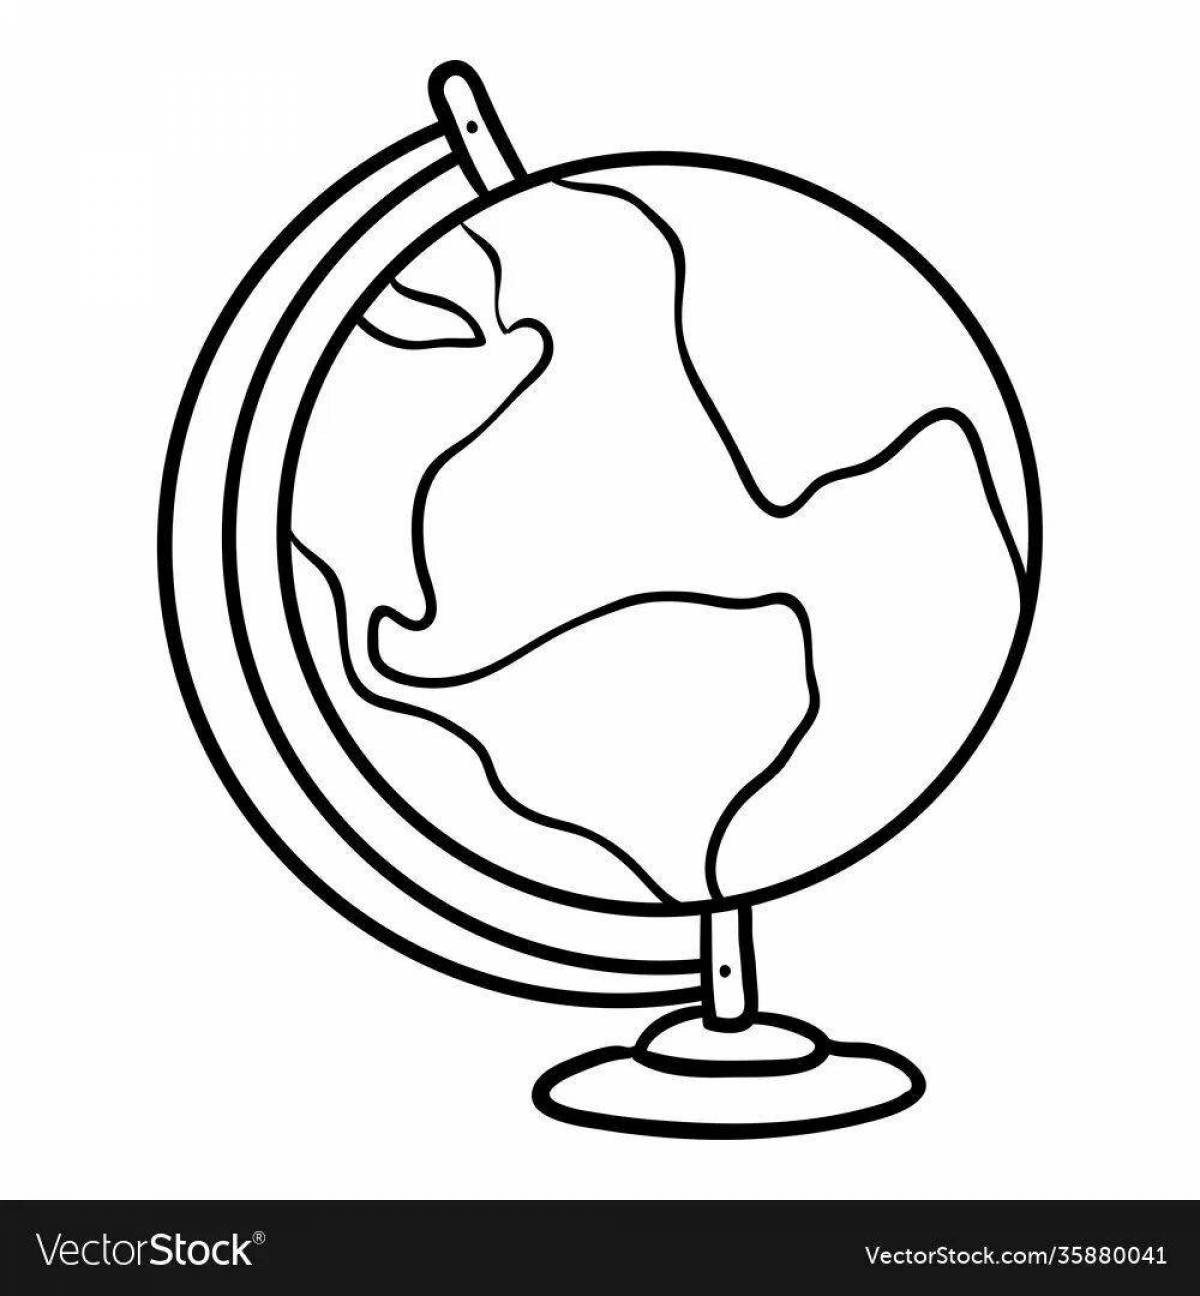 Funny globe drawing for kids